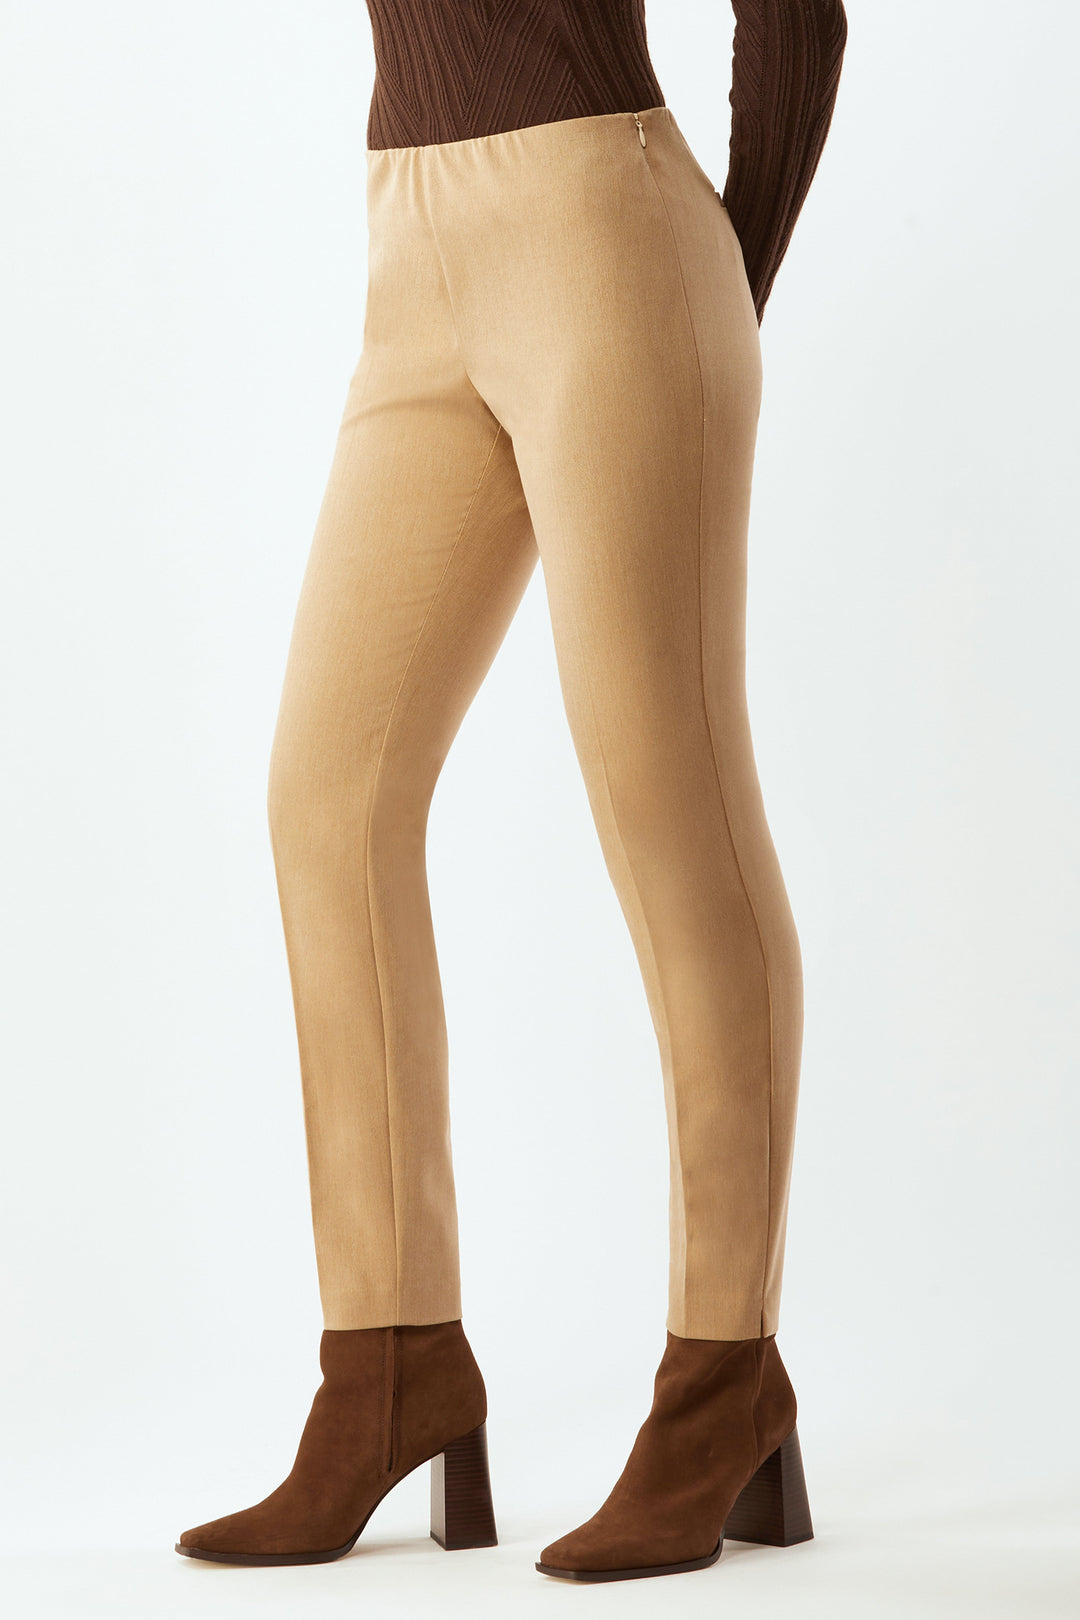 Springfield Classic Pull-On In 5Th Avenue Stretch - Camel